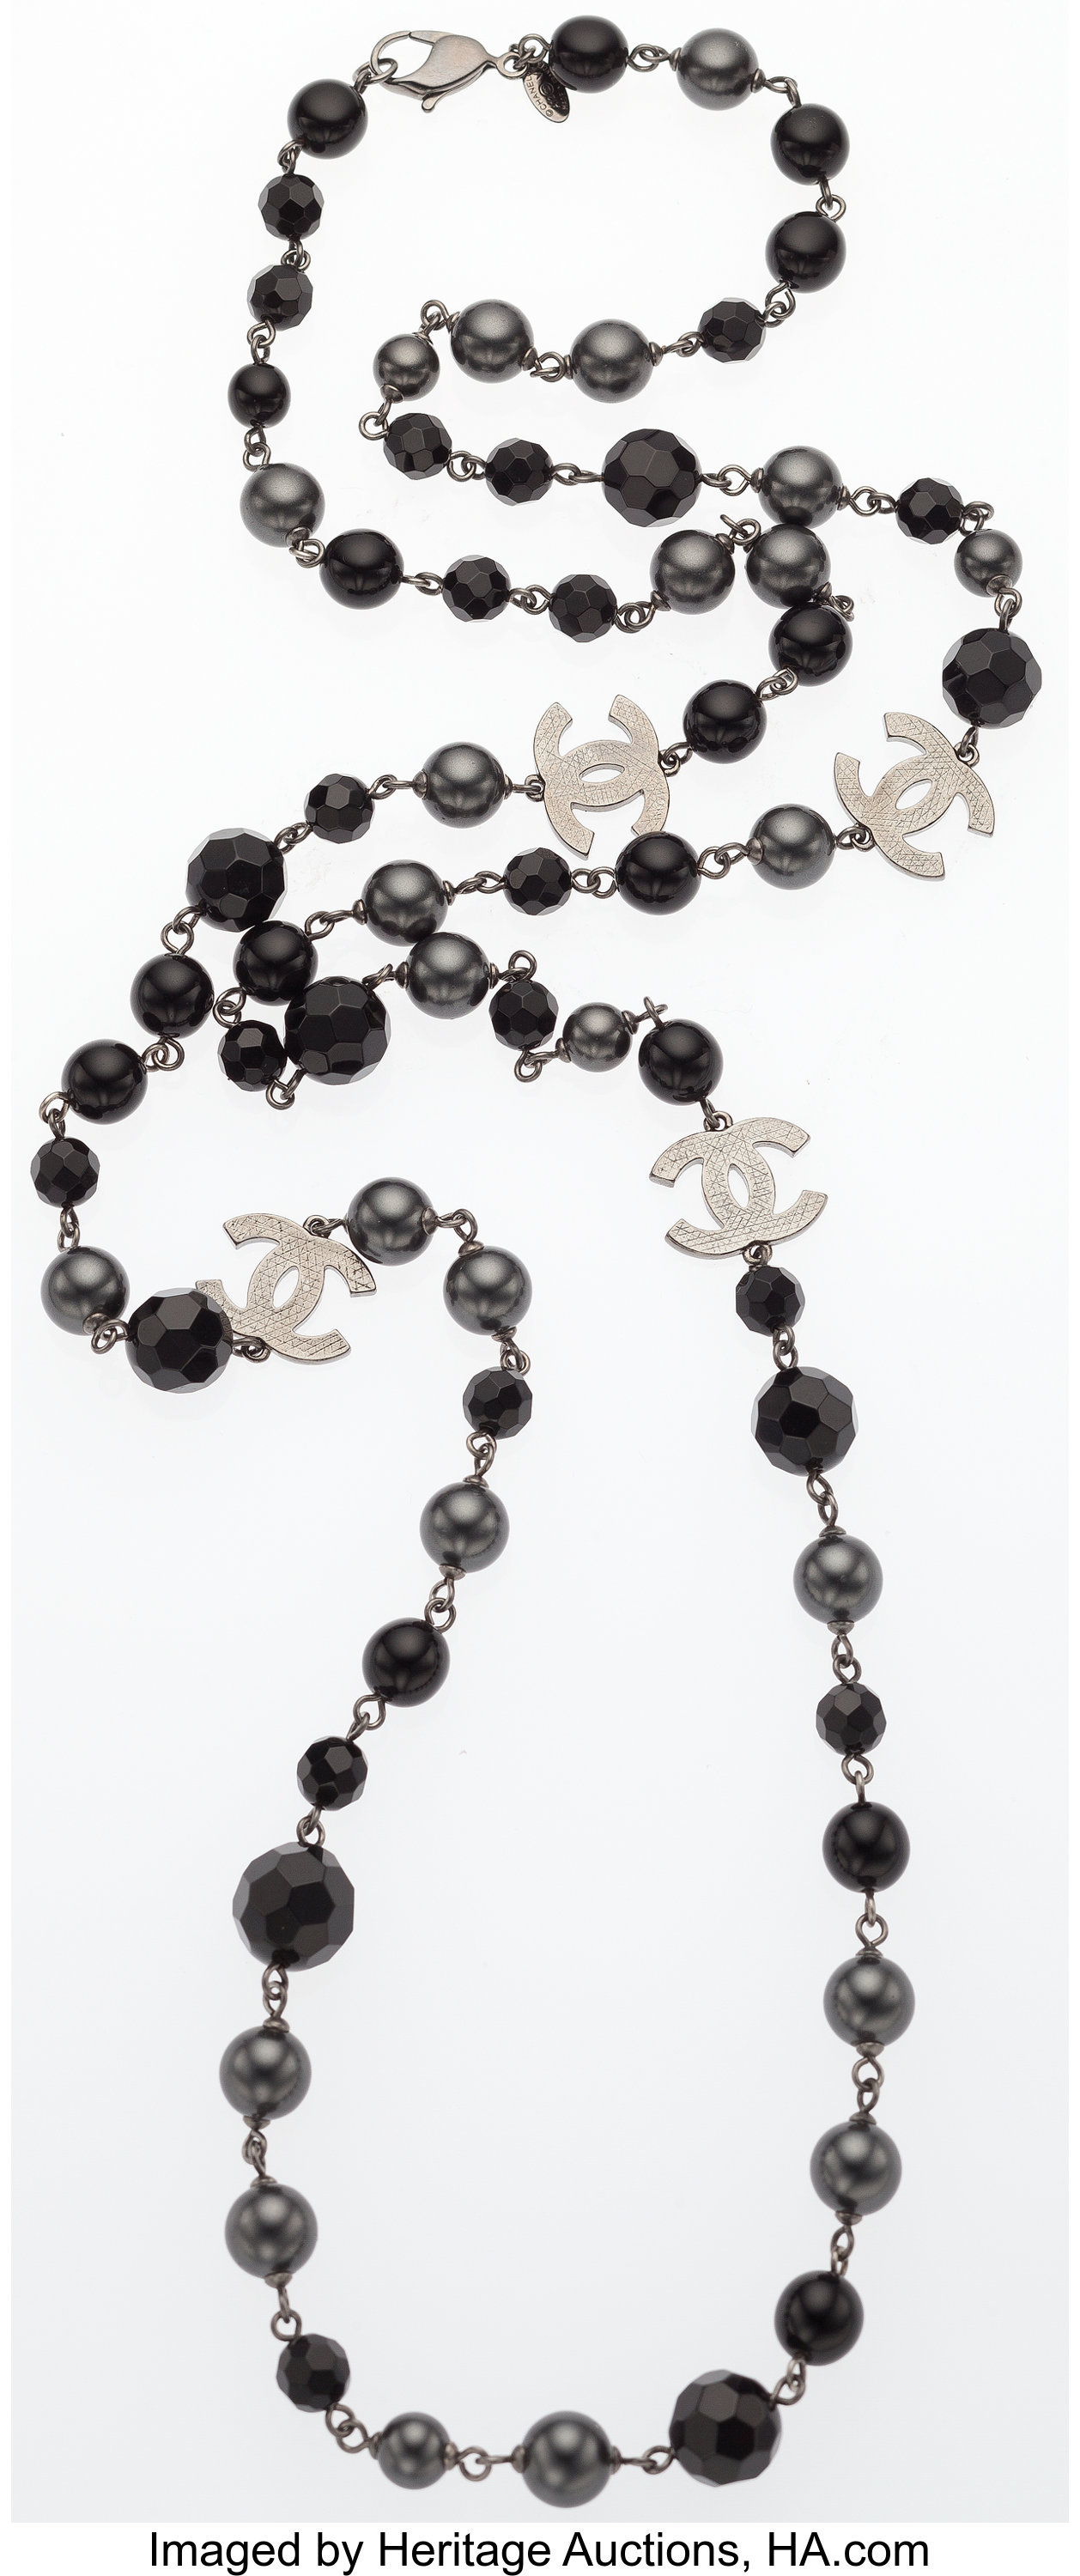 Top 78+ imagen chanel necklace beads